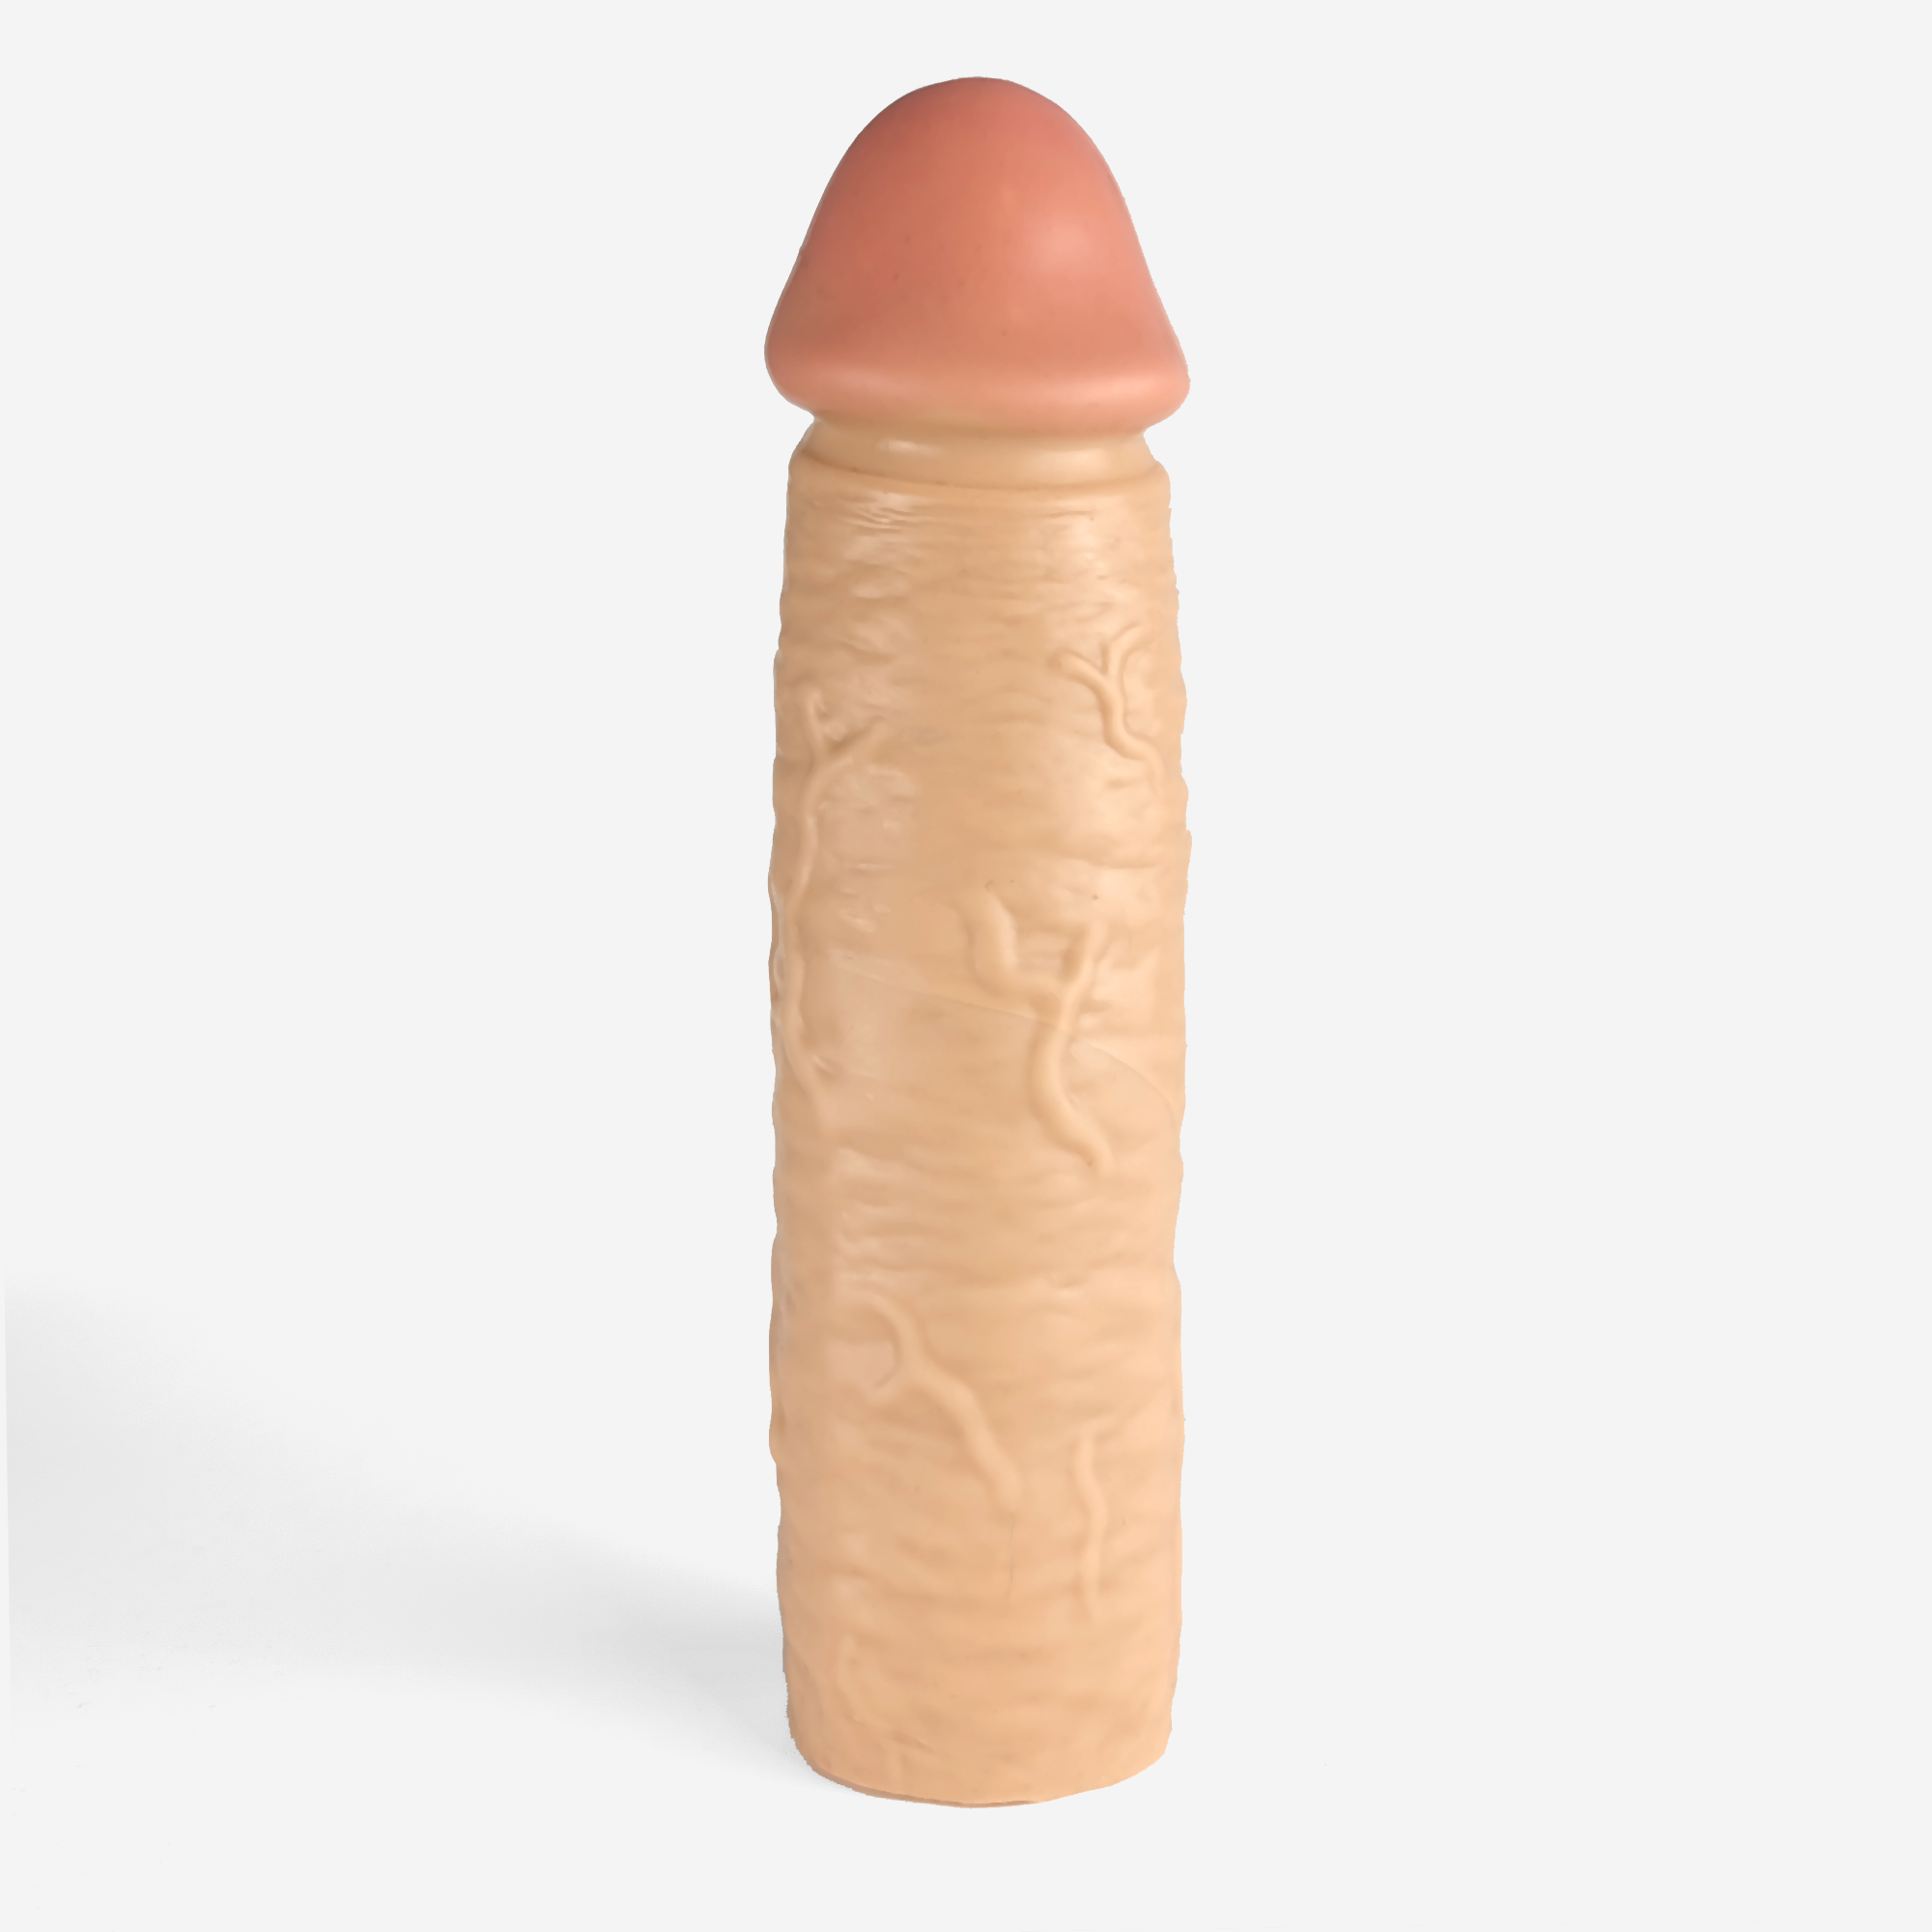 10 Inch Penis Extension jolie streaming